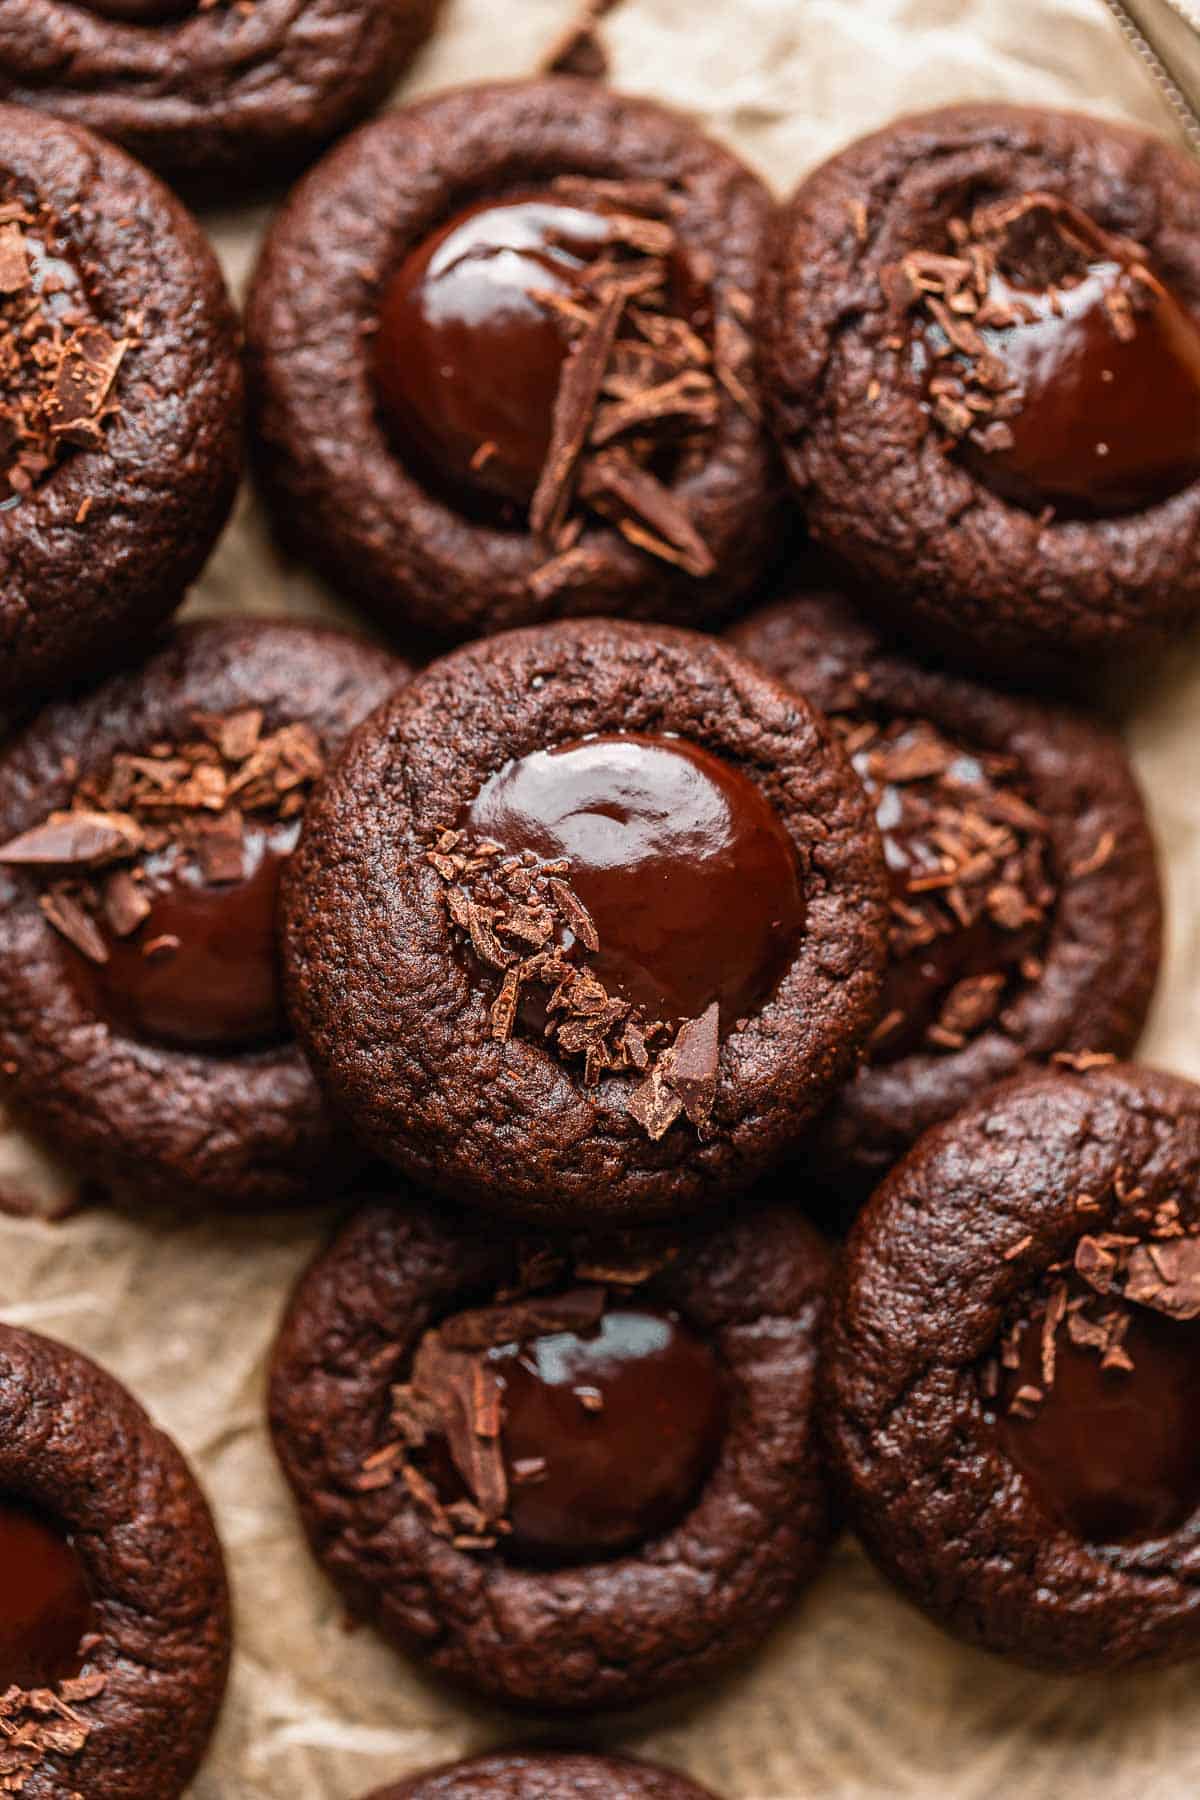 Chocolate thumbprint cookies filled with chocolate ganache and sprinkled with chopped chocolate.